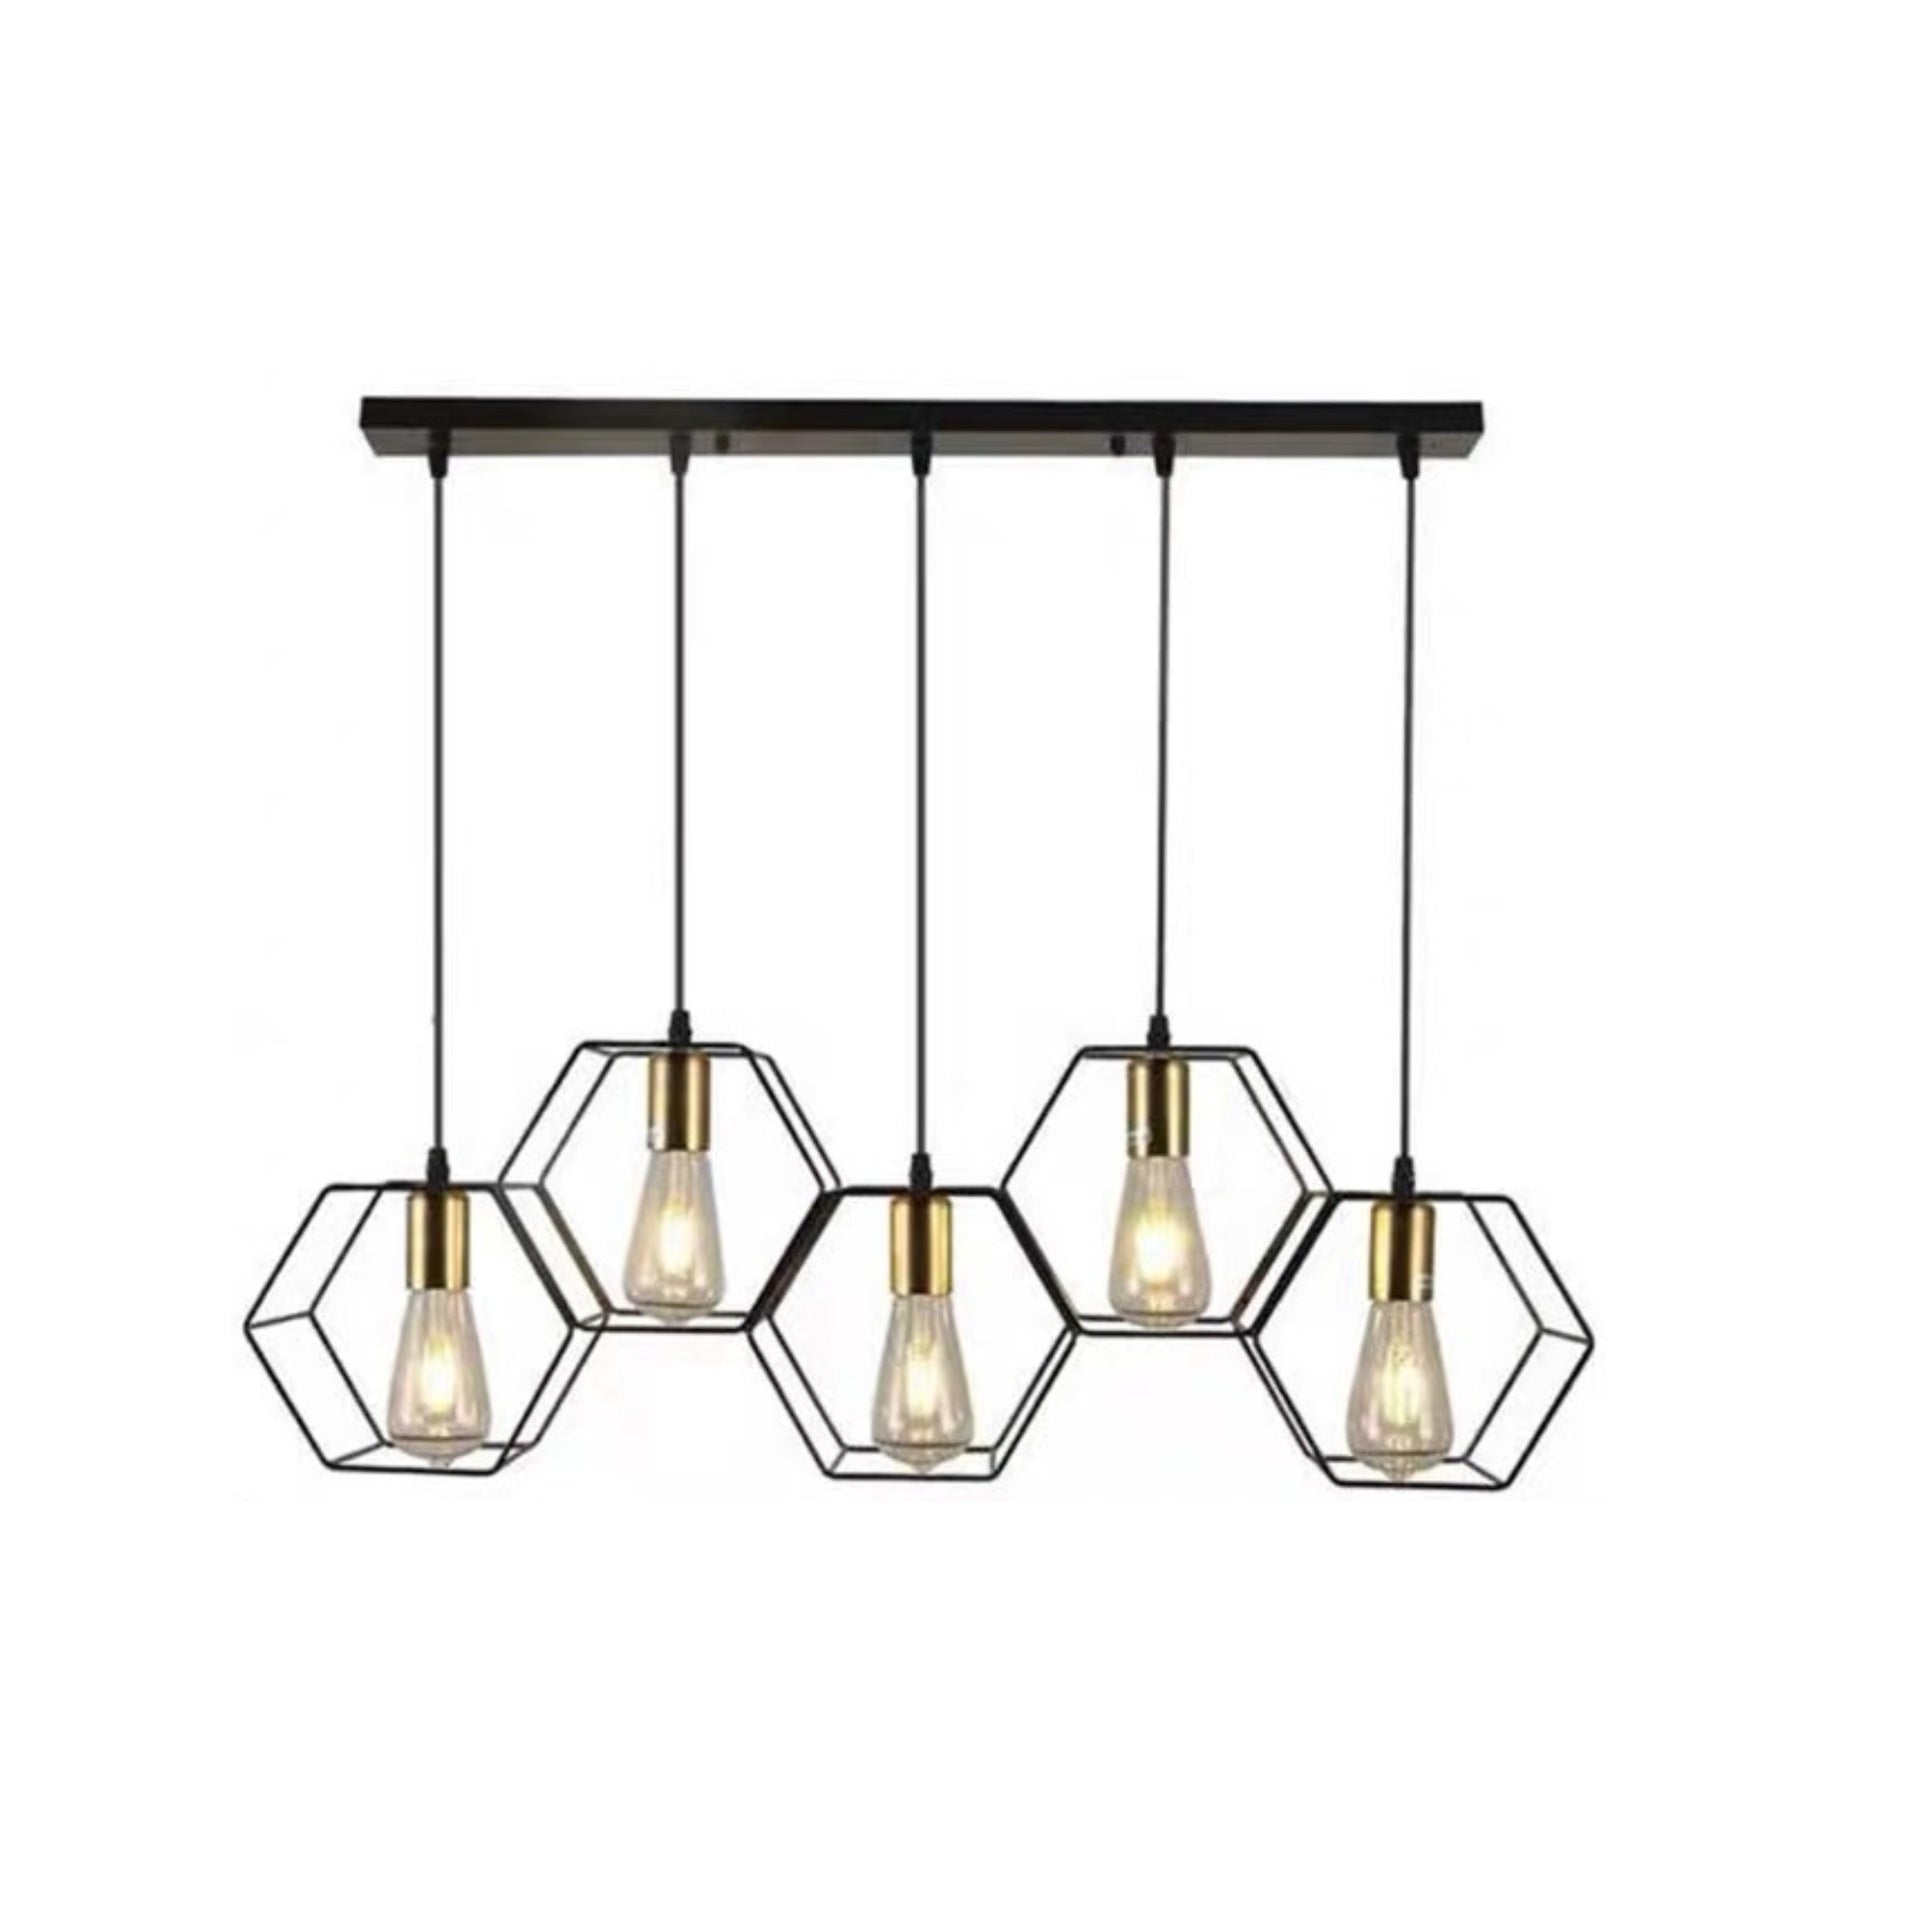 Pendant Lamp Black with Metal Structure and 5 Cooper Sockets E26x5 L30.91 in x H7.87in 120v/60Hz